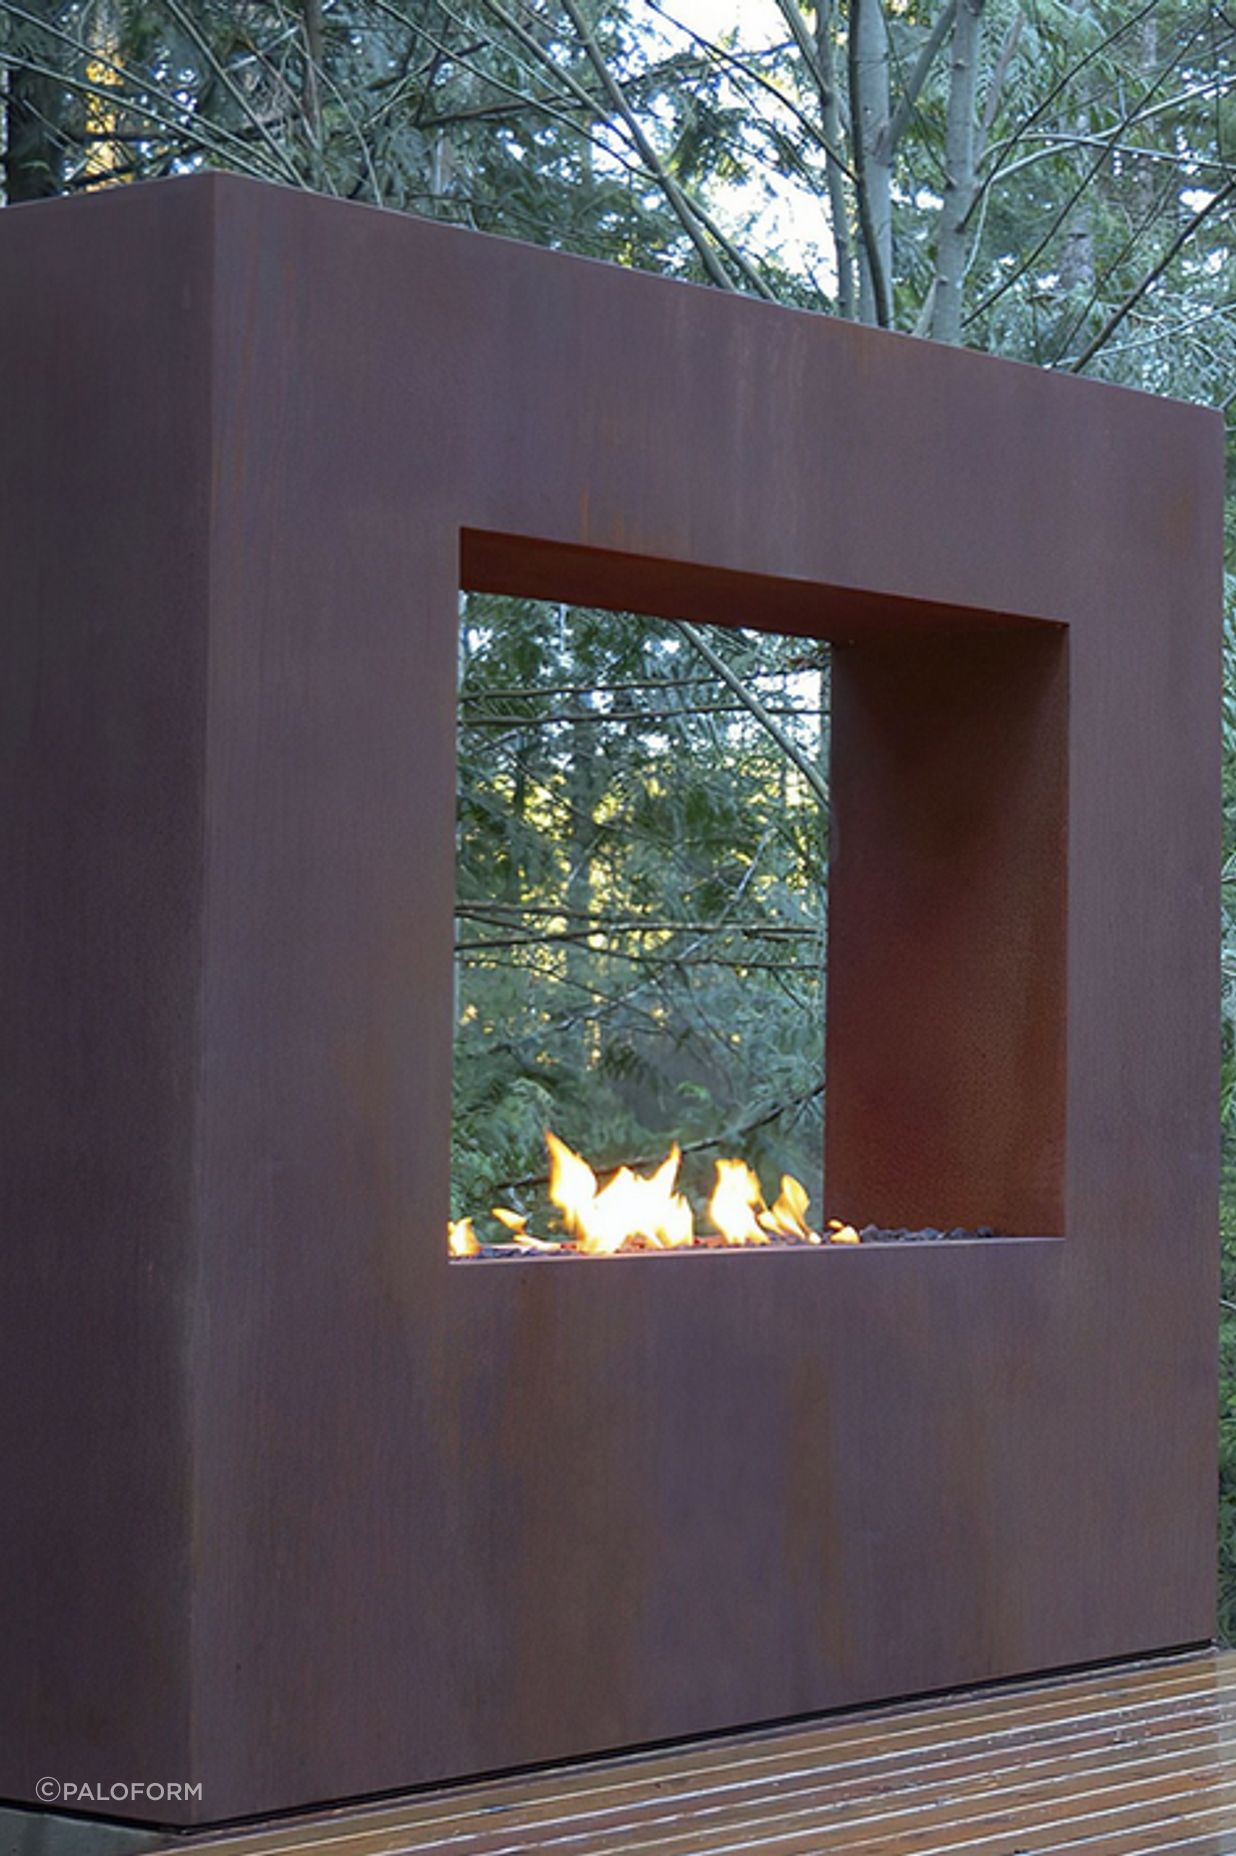 The Kodo outdoor fireplace resembles a work of art